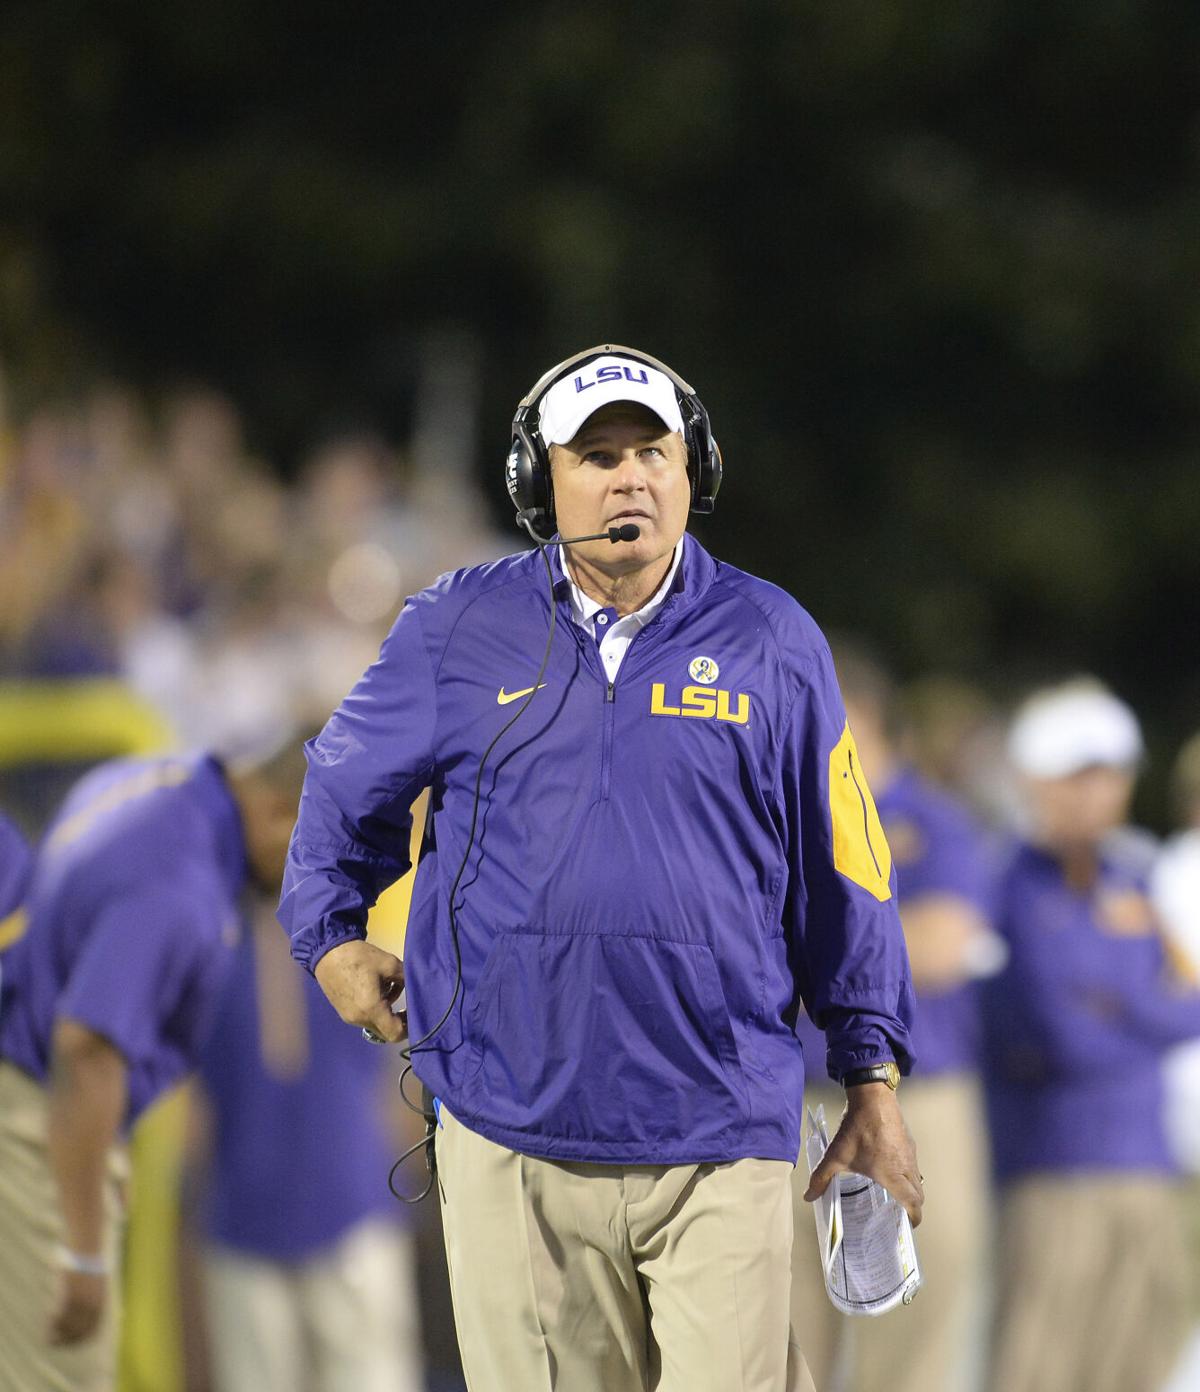 Les Miles' bosses ordered him to texting, being alone with female workers | News | theadvocate.com